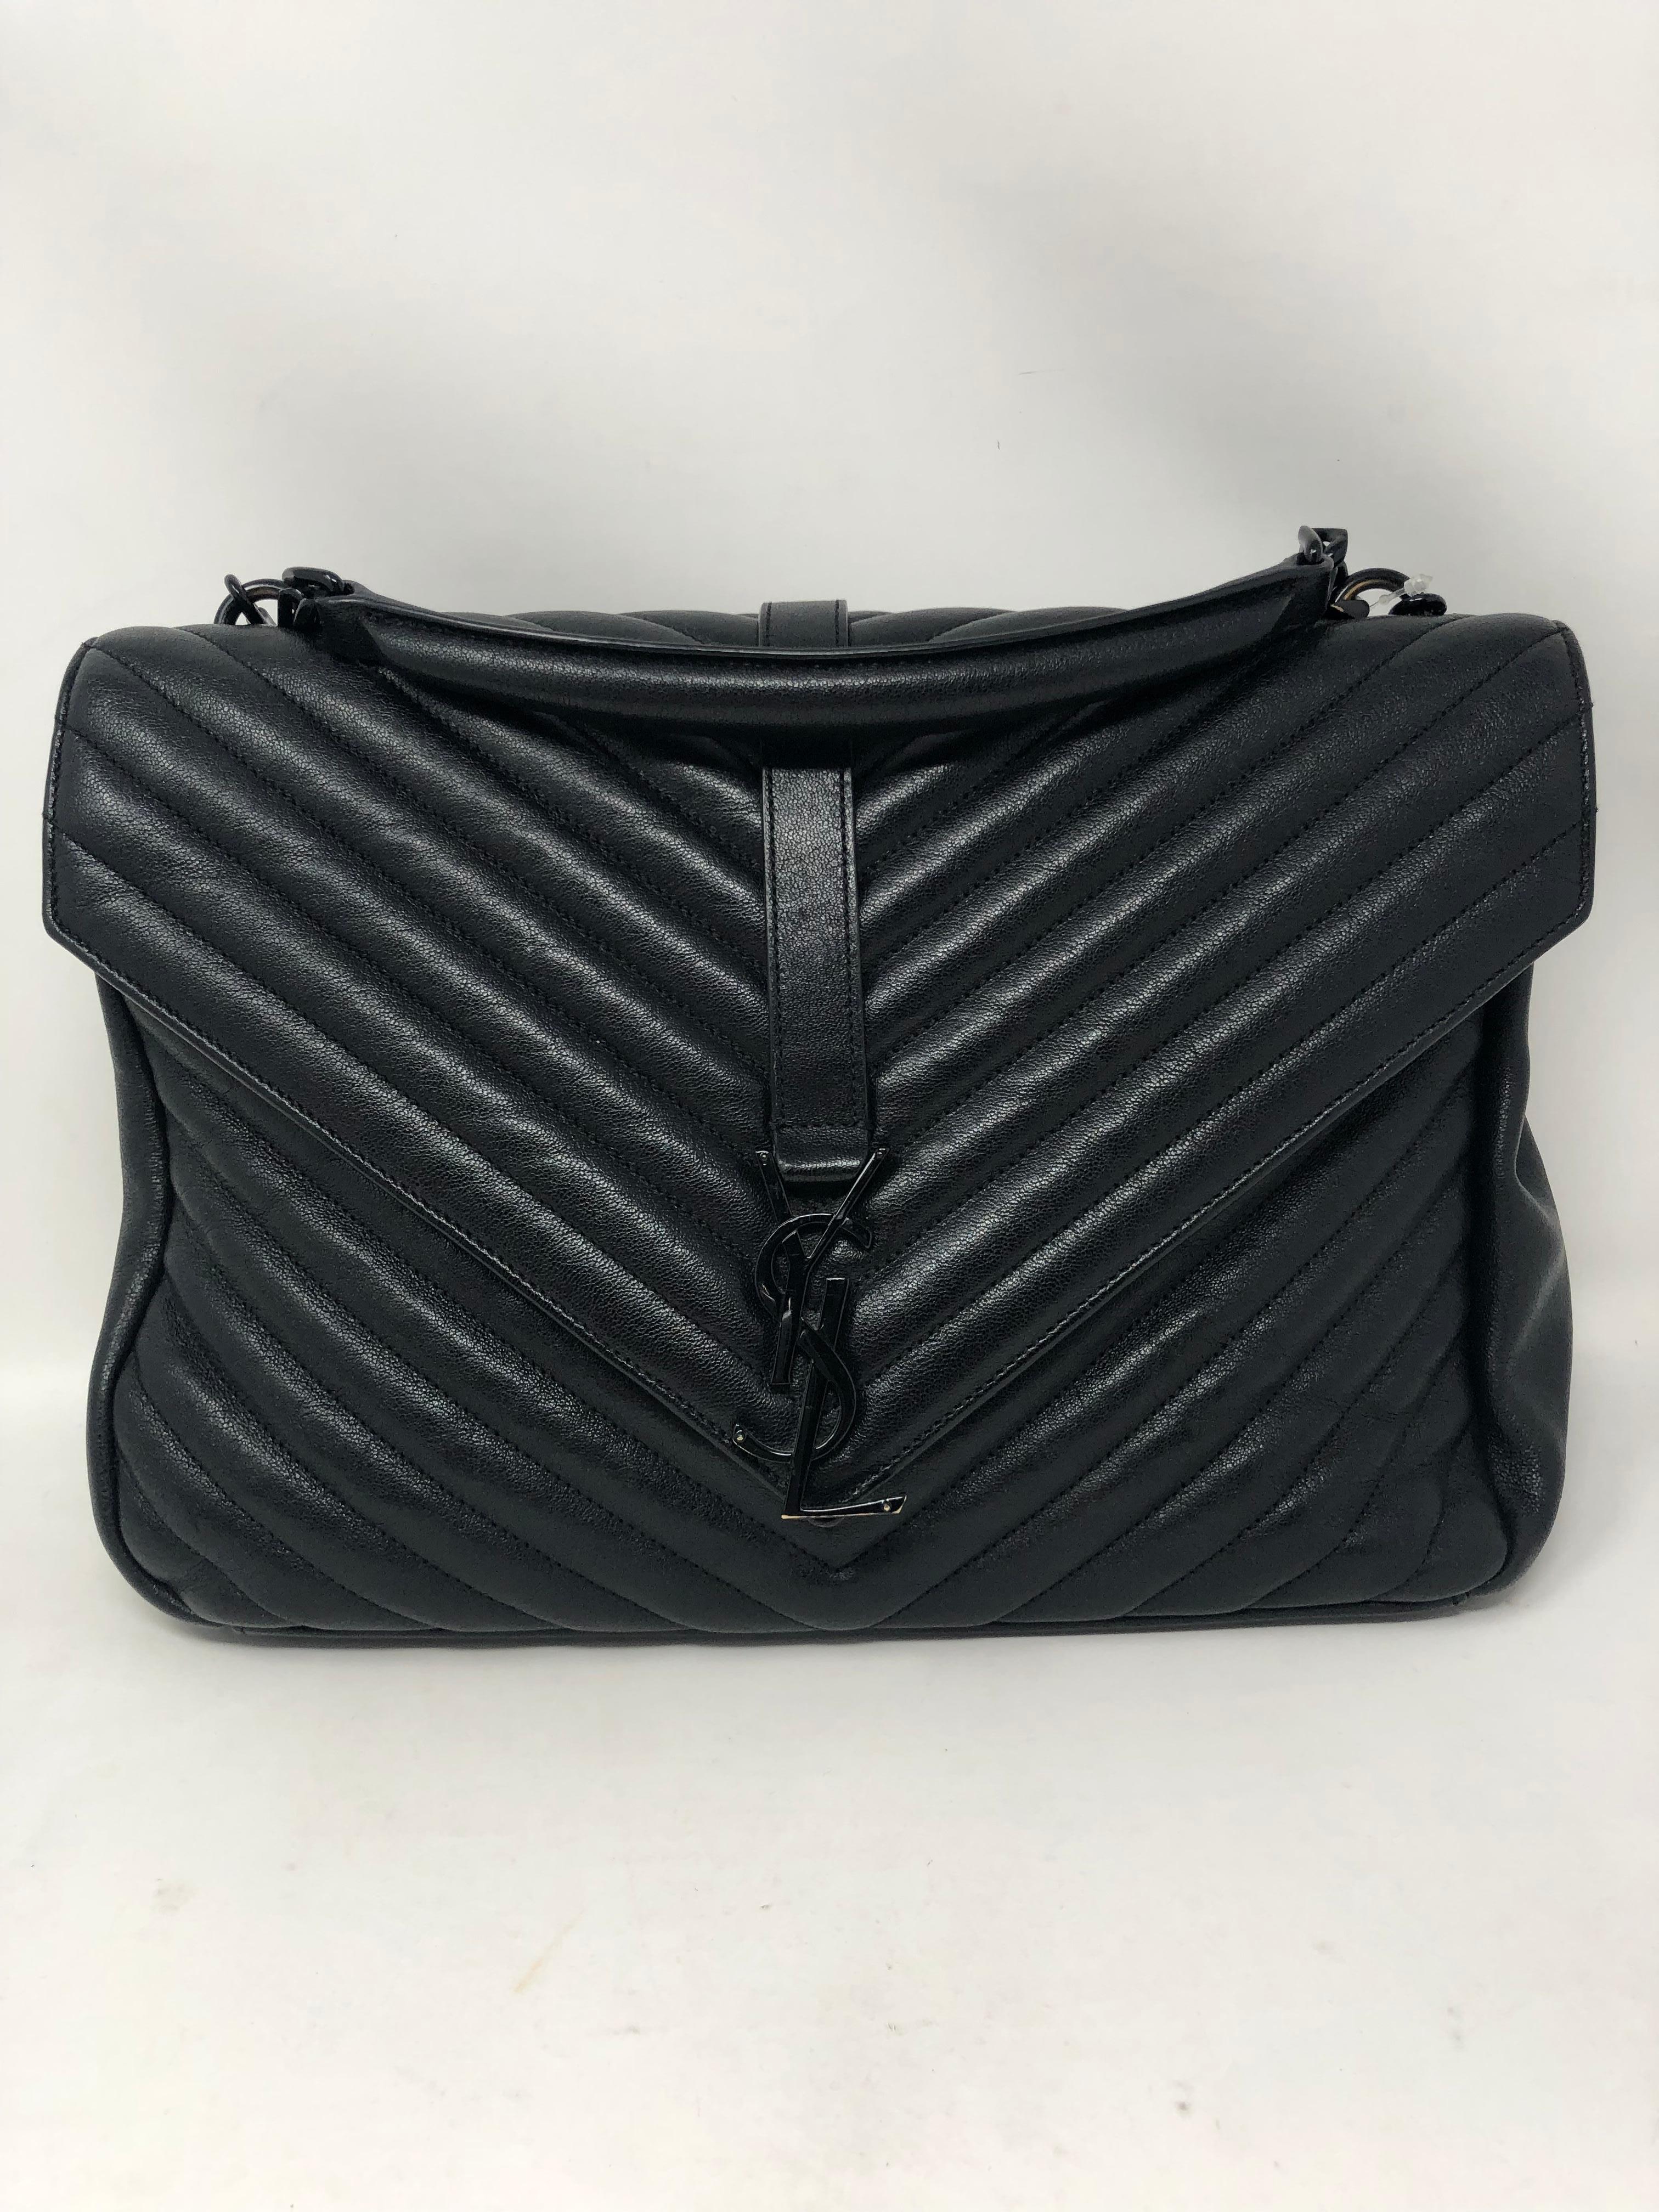 YSL Large Black on Black Matelasse Bag. Large quilted leather flap bag. Roomy interior. Can be worn 2 ways. Black metal hardware for a chic look. Good condition. Guaranteed authentic. 